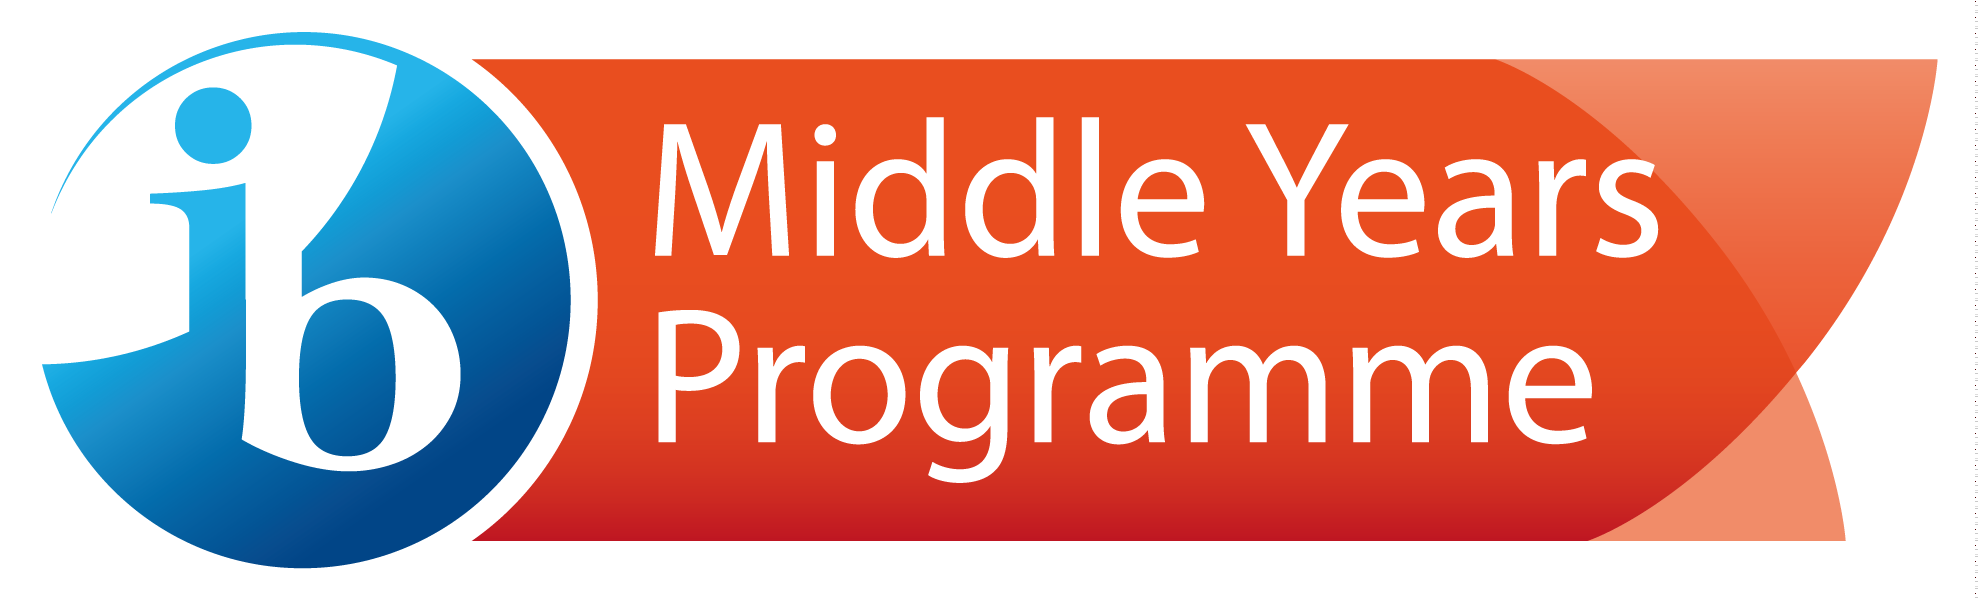 Middle Years Programme